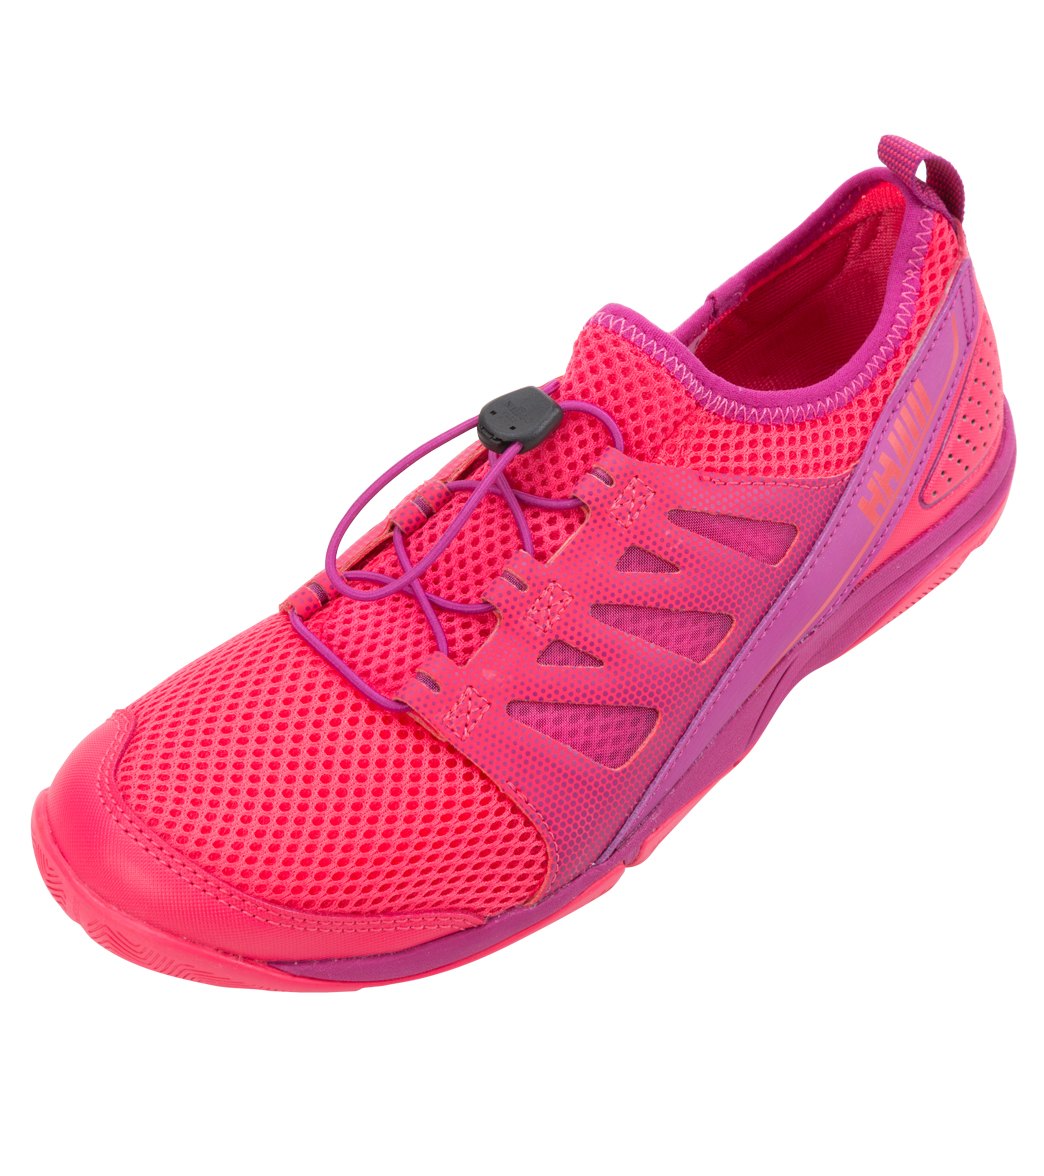 Helly Hansen Women's Aquapace 2 Water Shoes at SwimOutlet.com